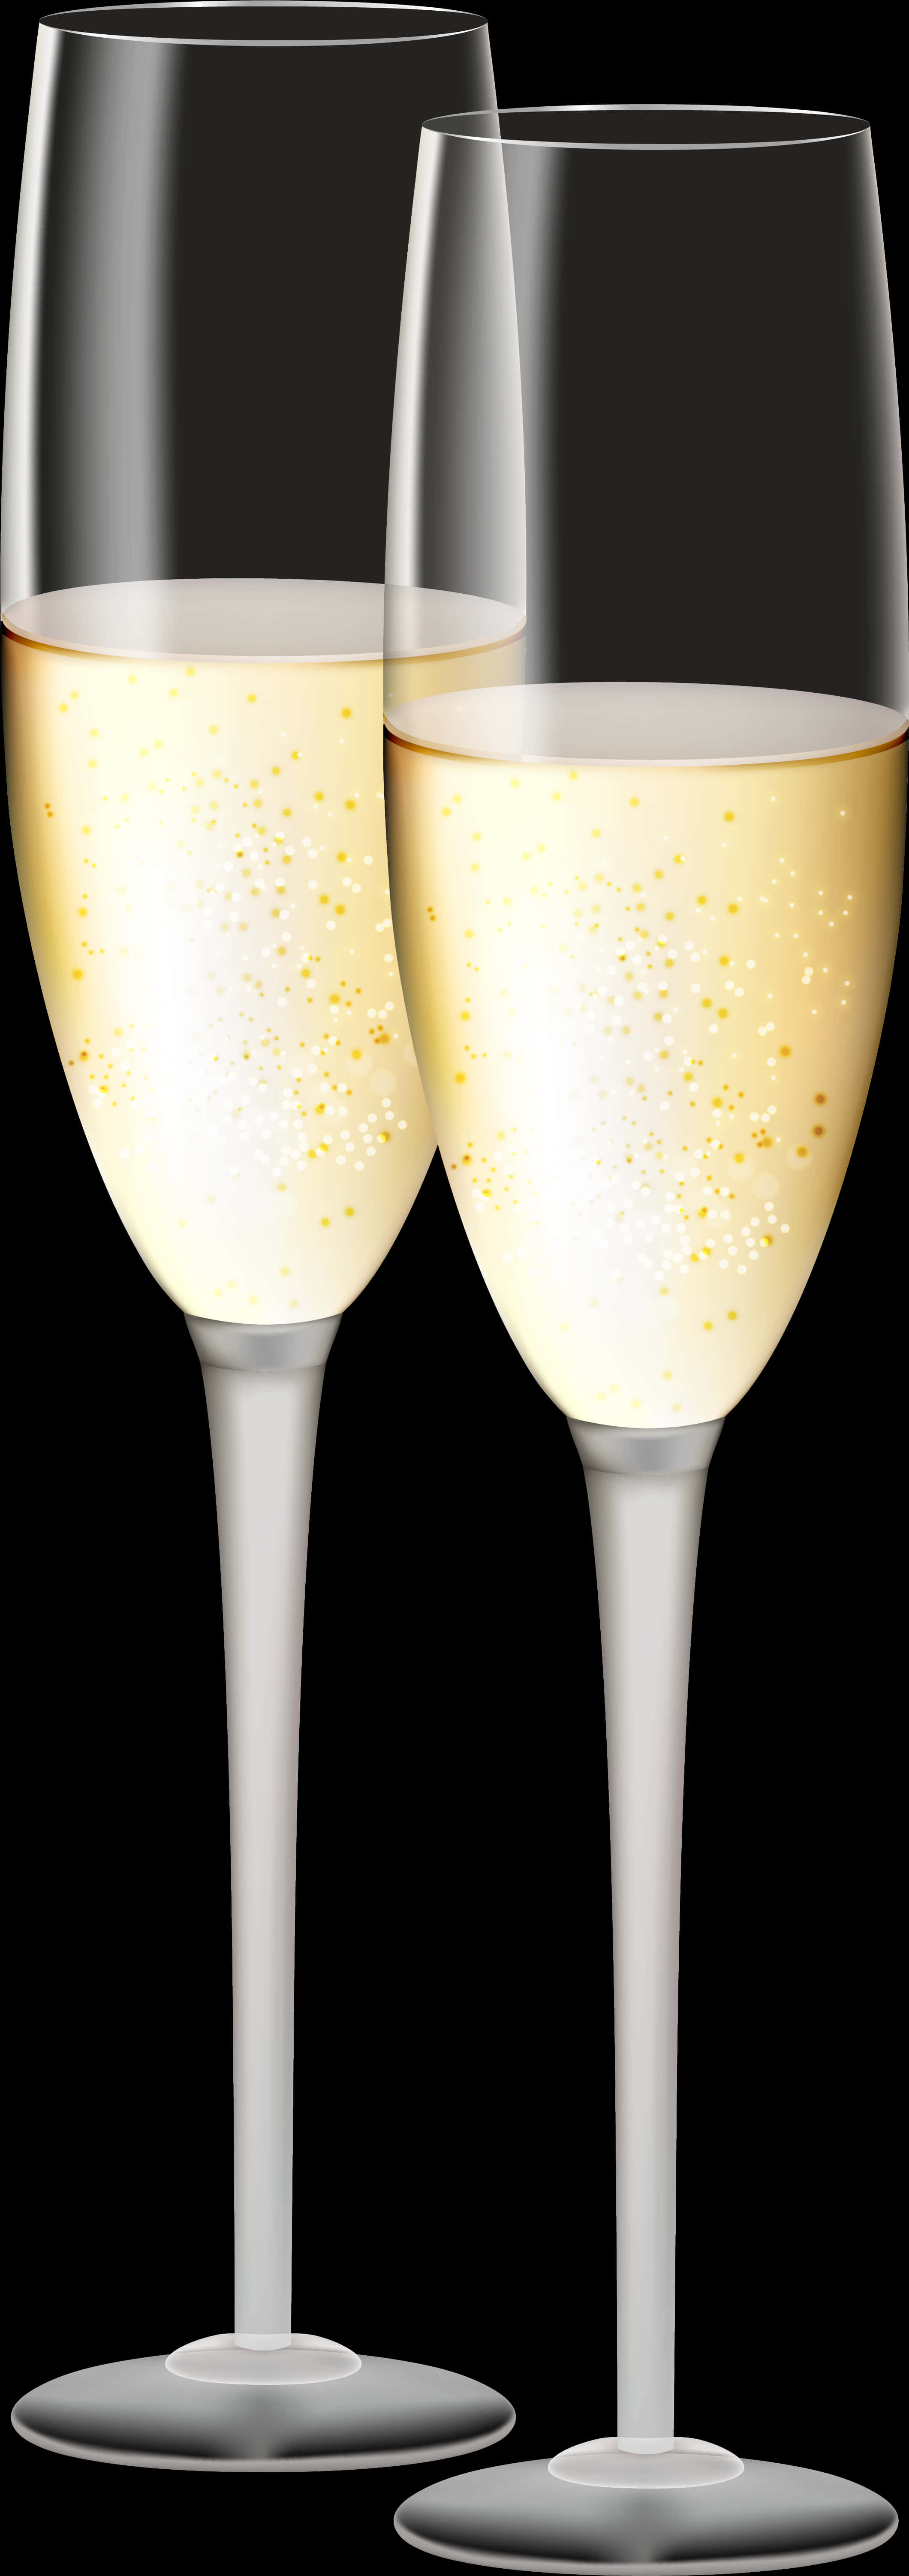 Two Glasses Of Champagne With Bubbles